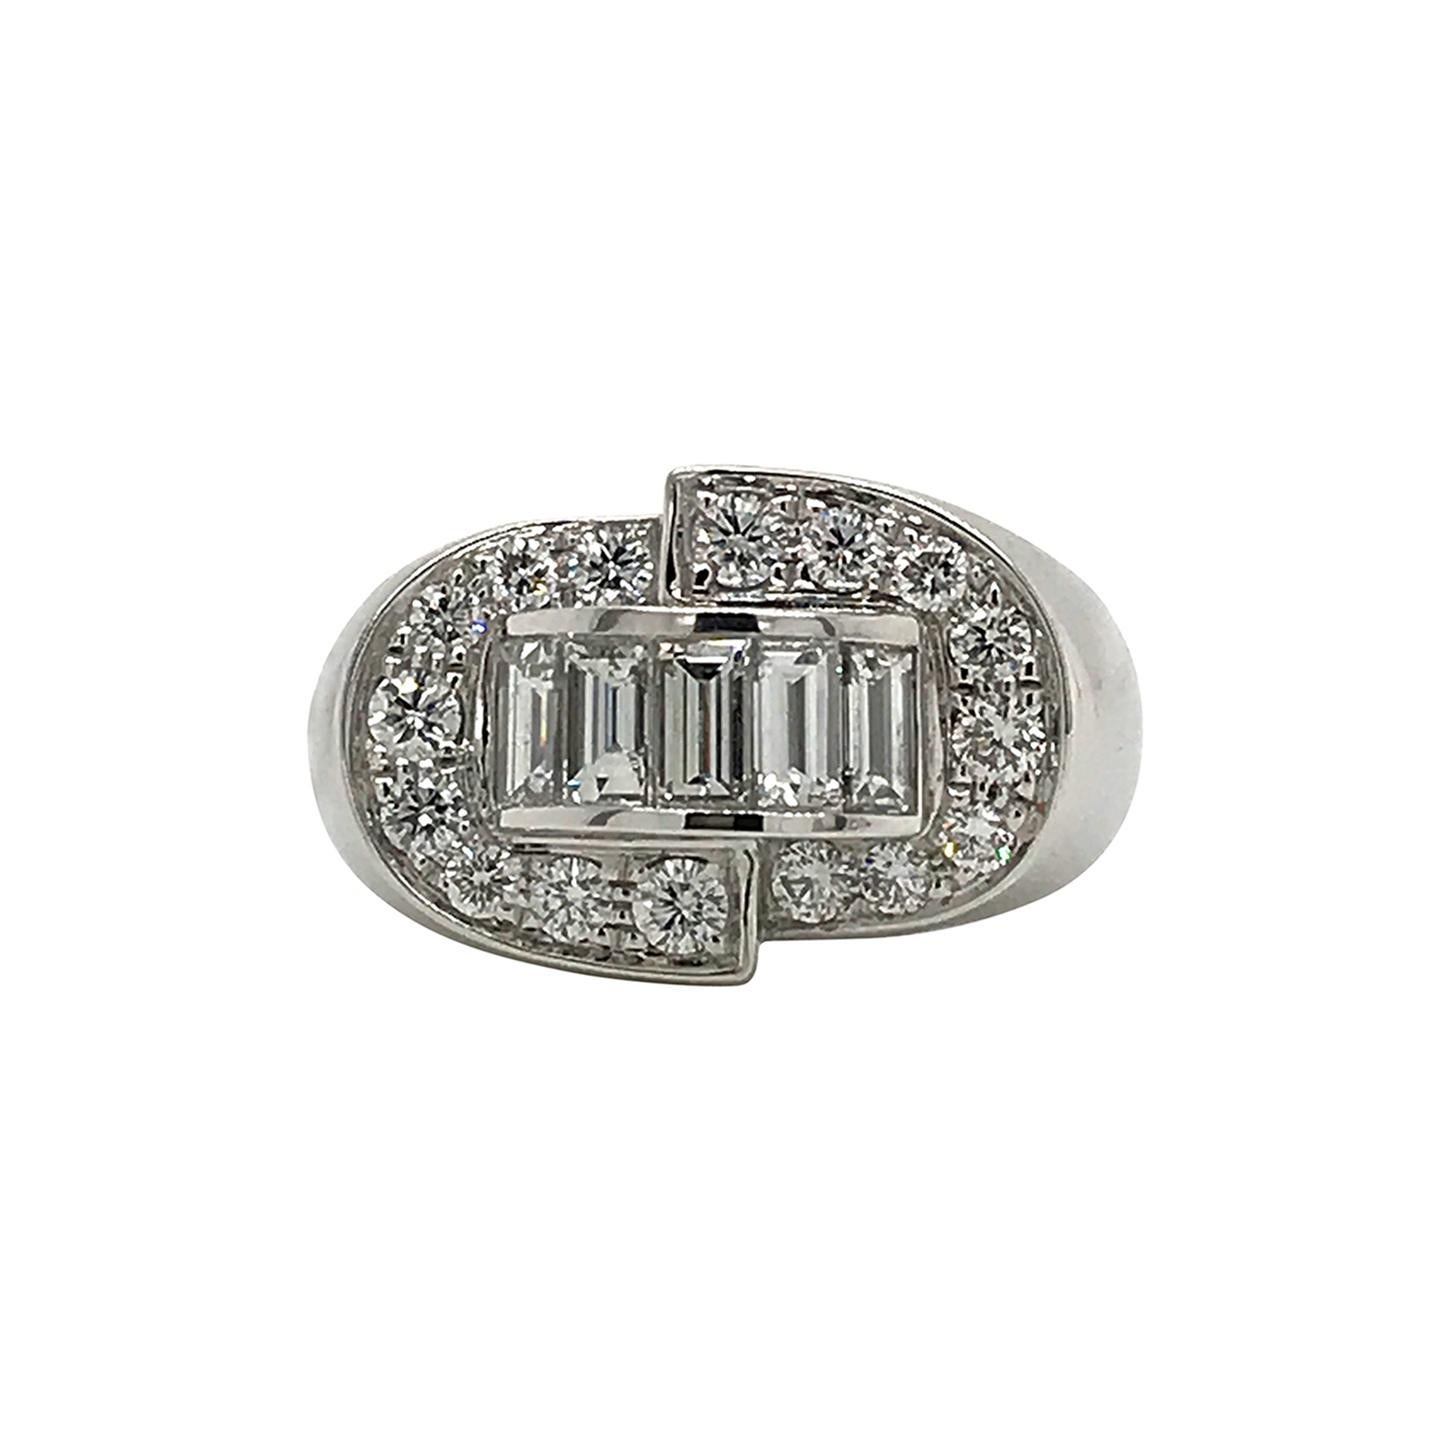 The ring we present is a stunning Art Deco piece in 18 K white gold, designed to capture the essence of the era's iconic style. With a solid weight of 16.33 grams, this ring embodies luxury and superior quality.

This ring is adorned with five